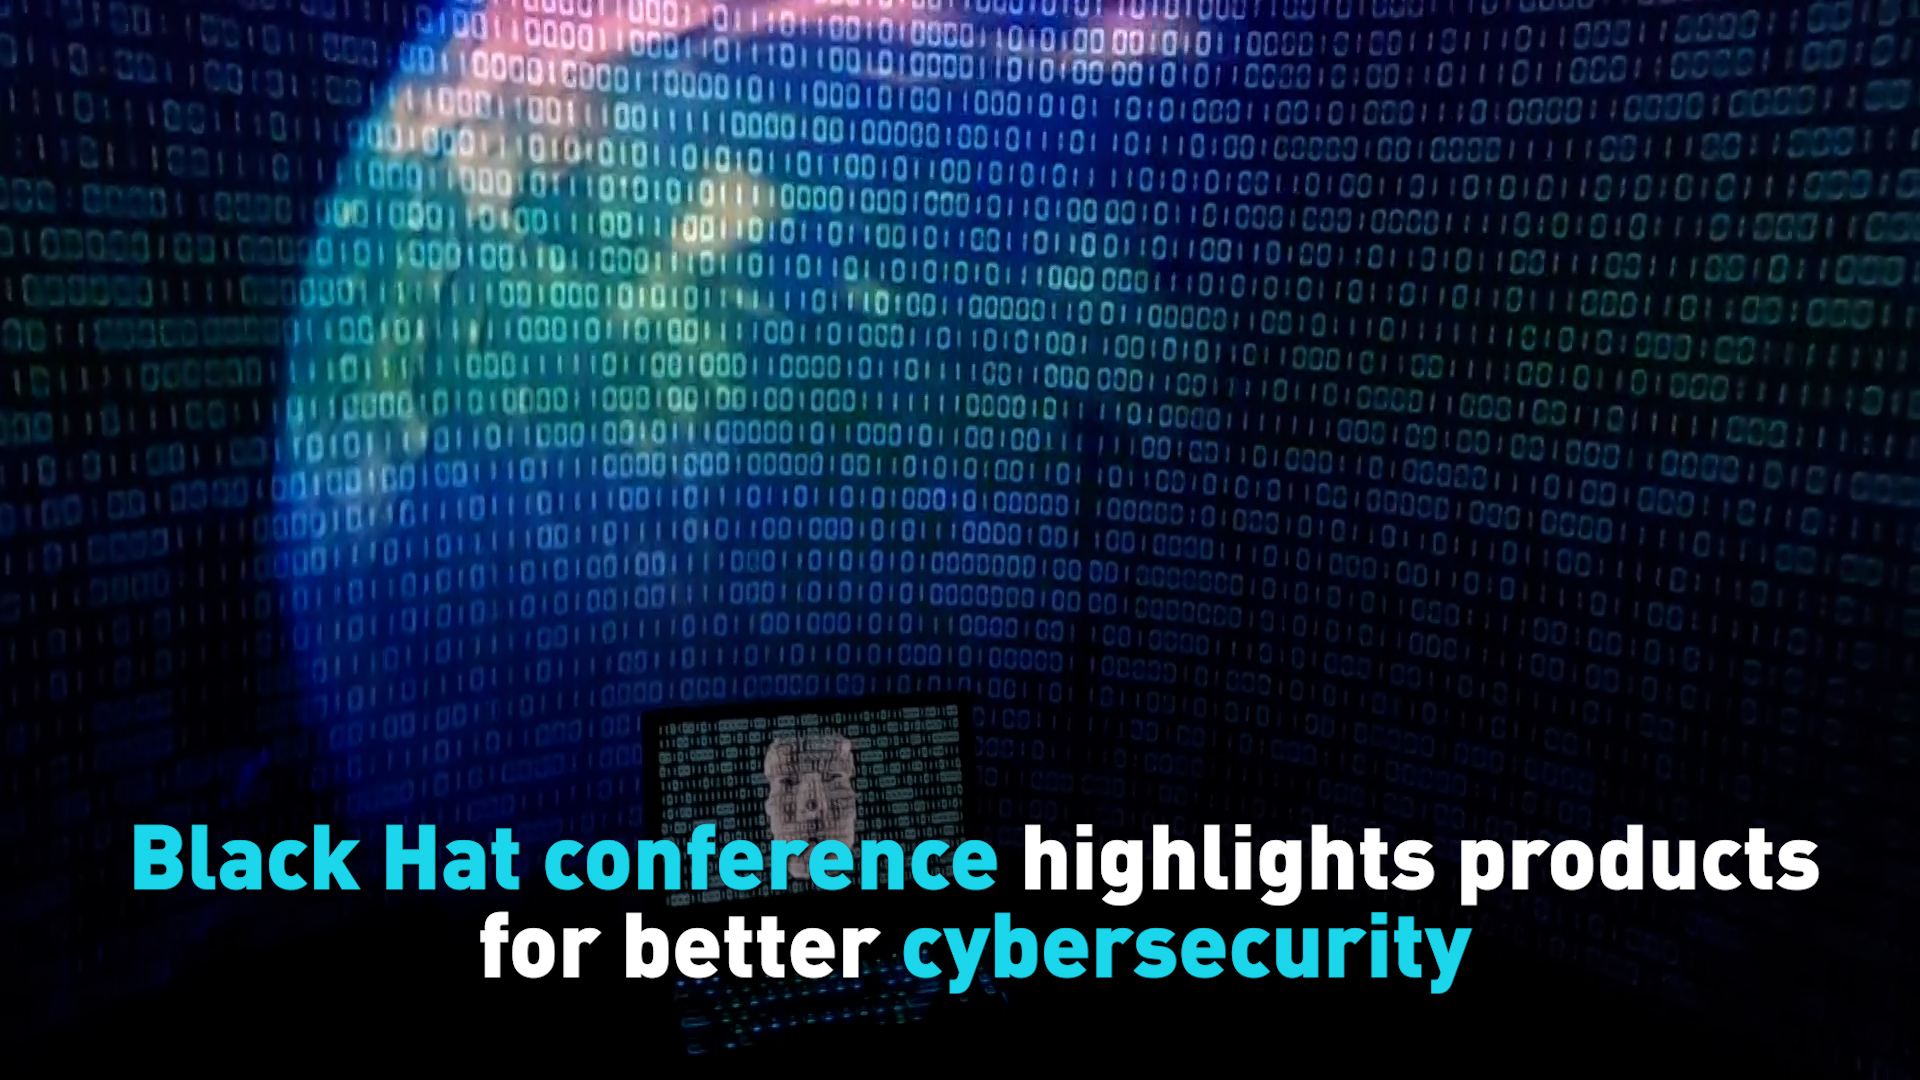 Black Hat conference highlights products for better cybersecurity CGTN